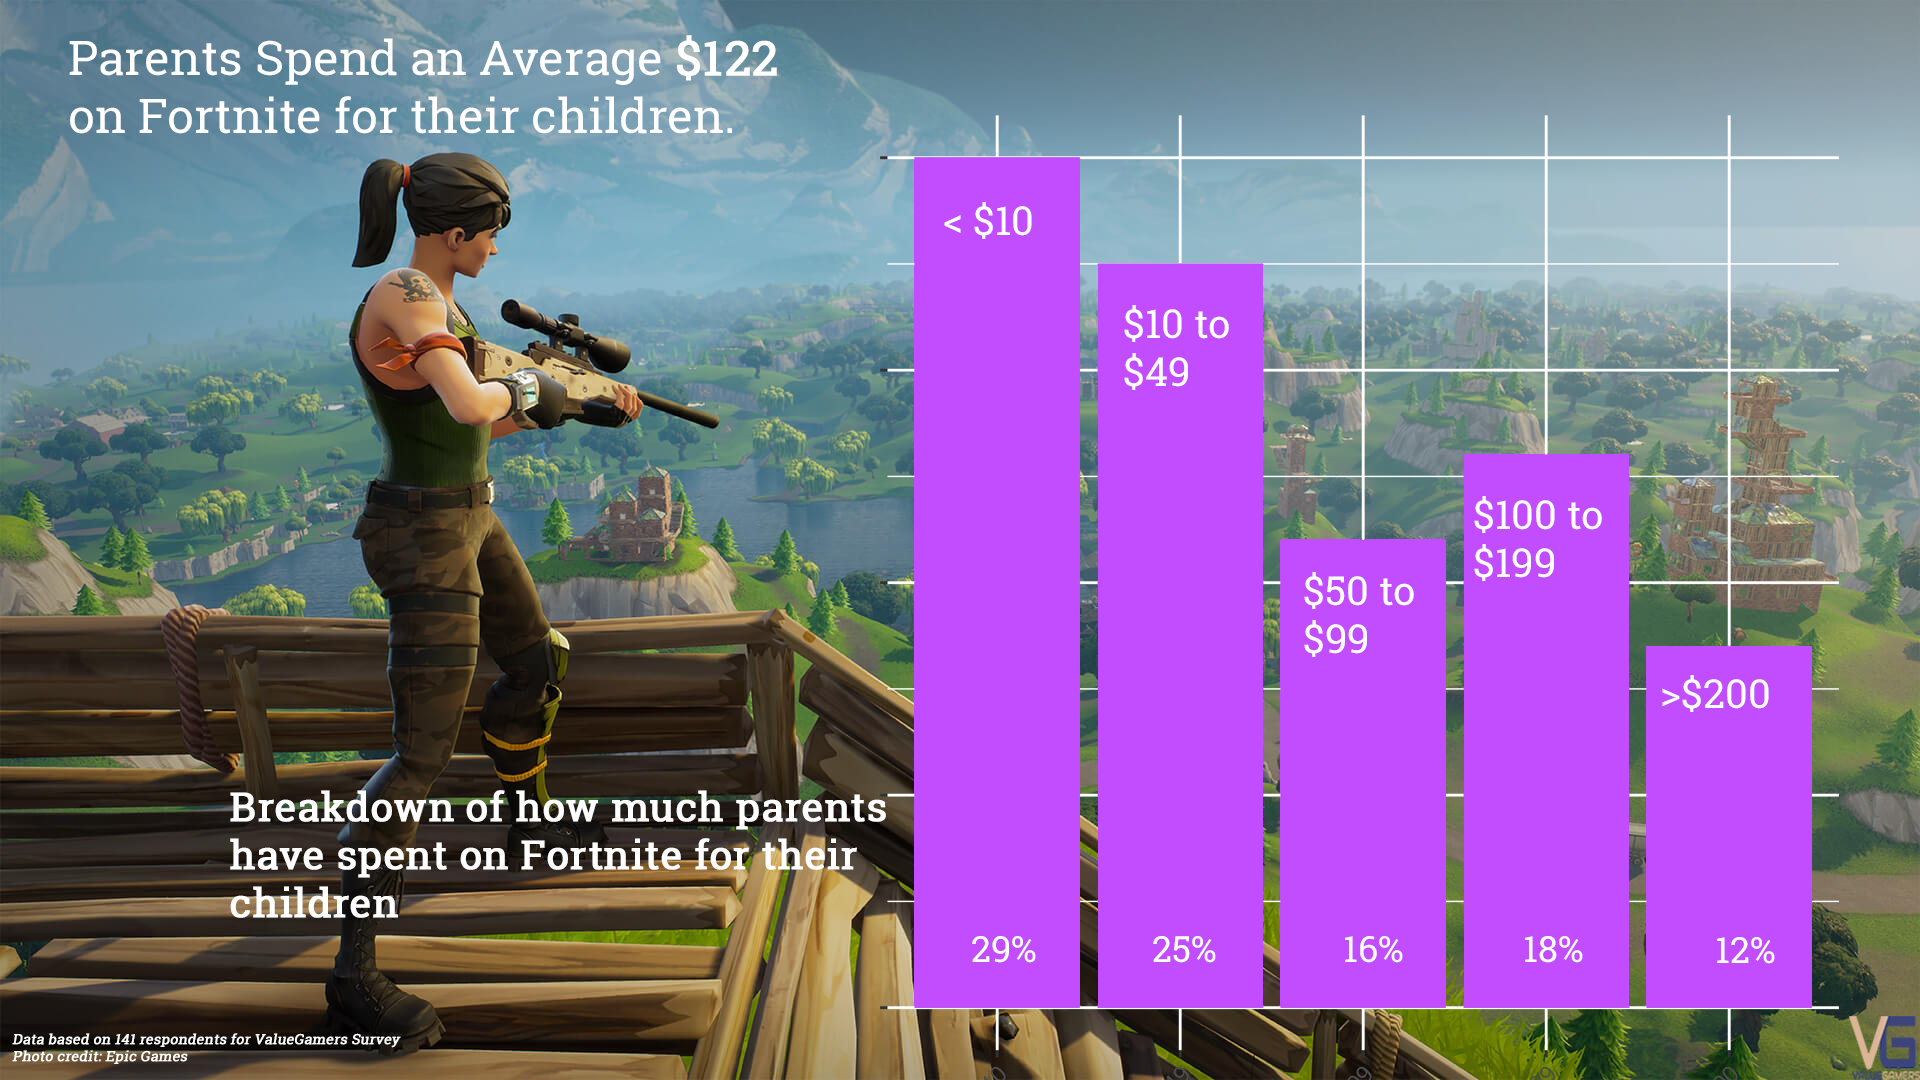 The Relationship Between Fortnite, Parents and Their Children